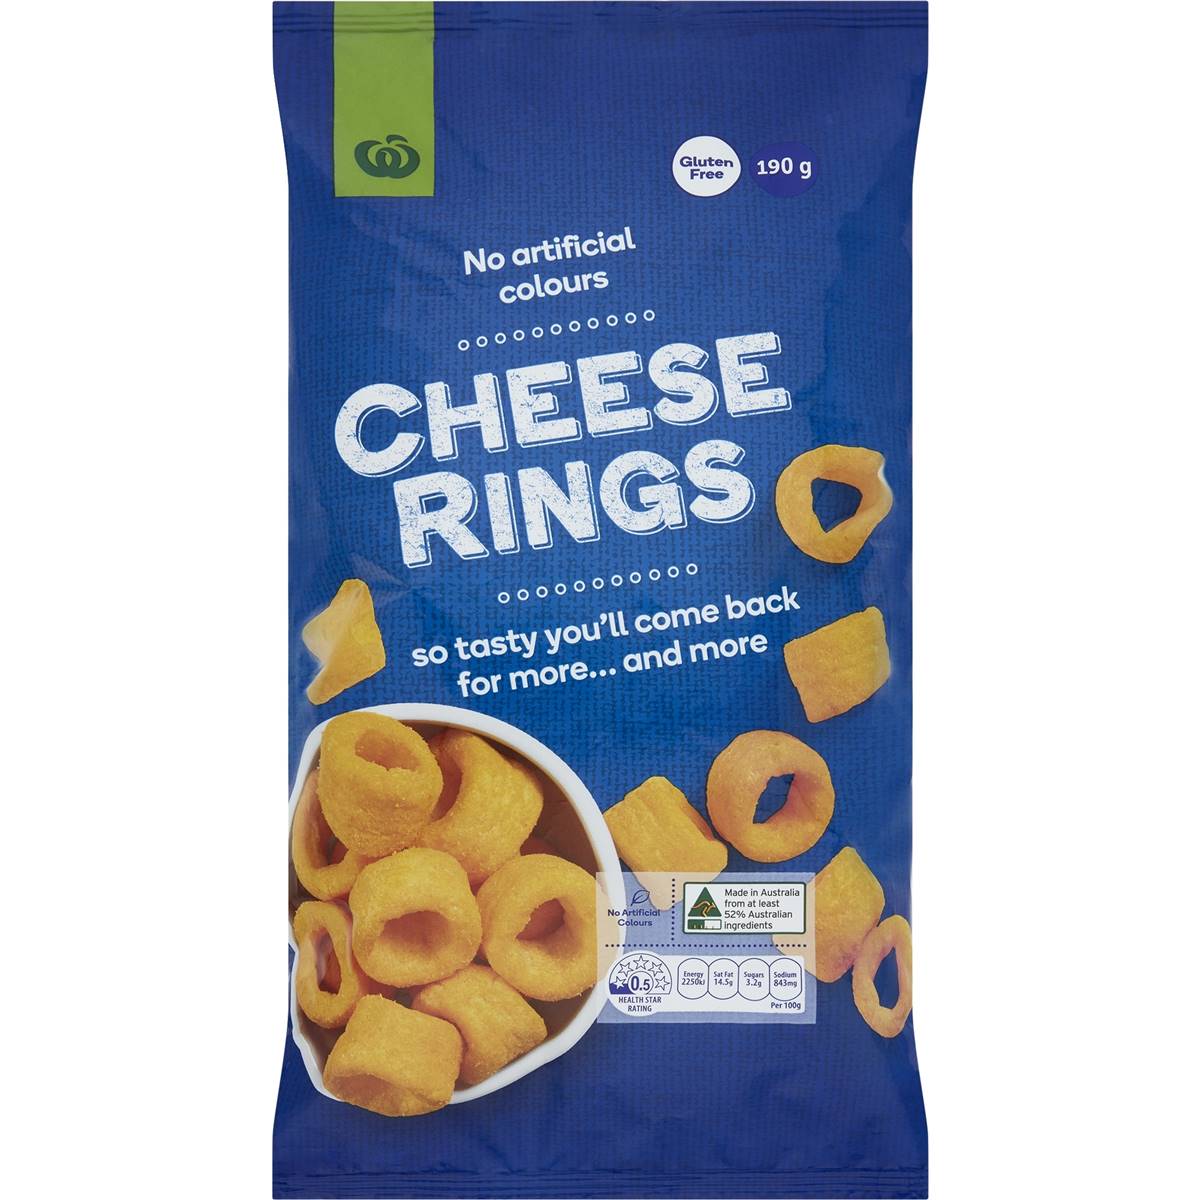 Calories in Woolworths Cheese Rings